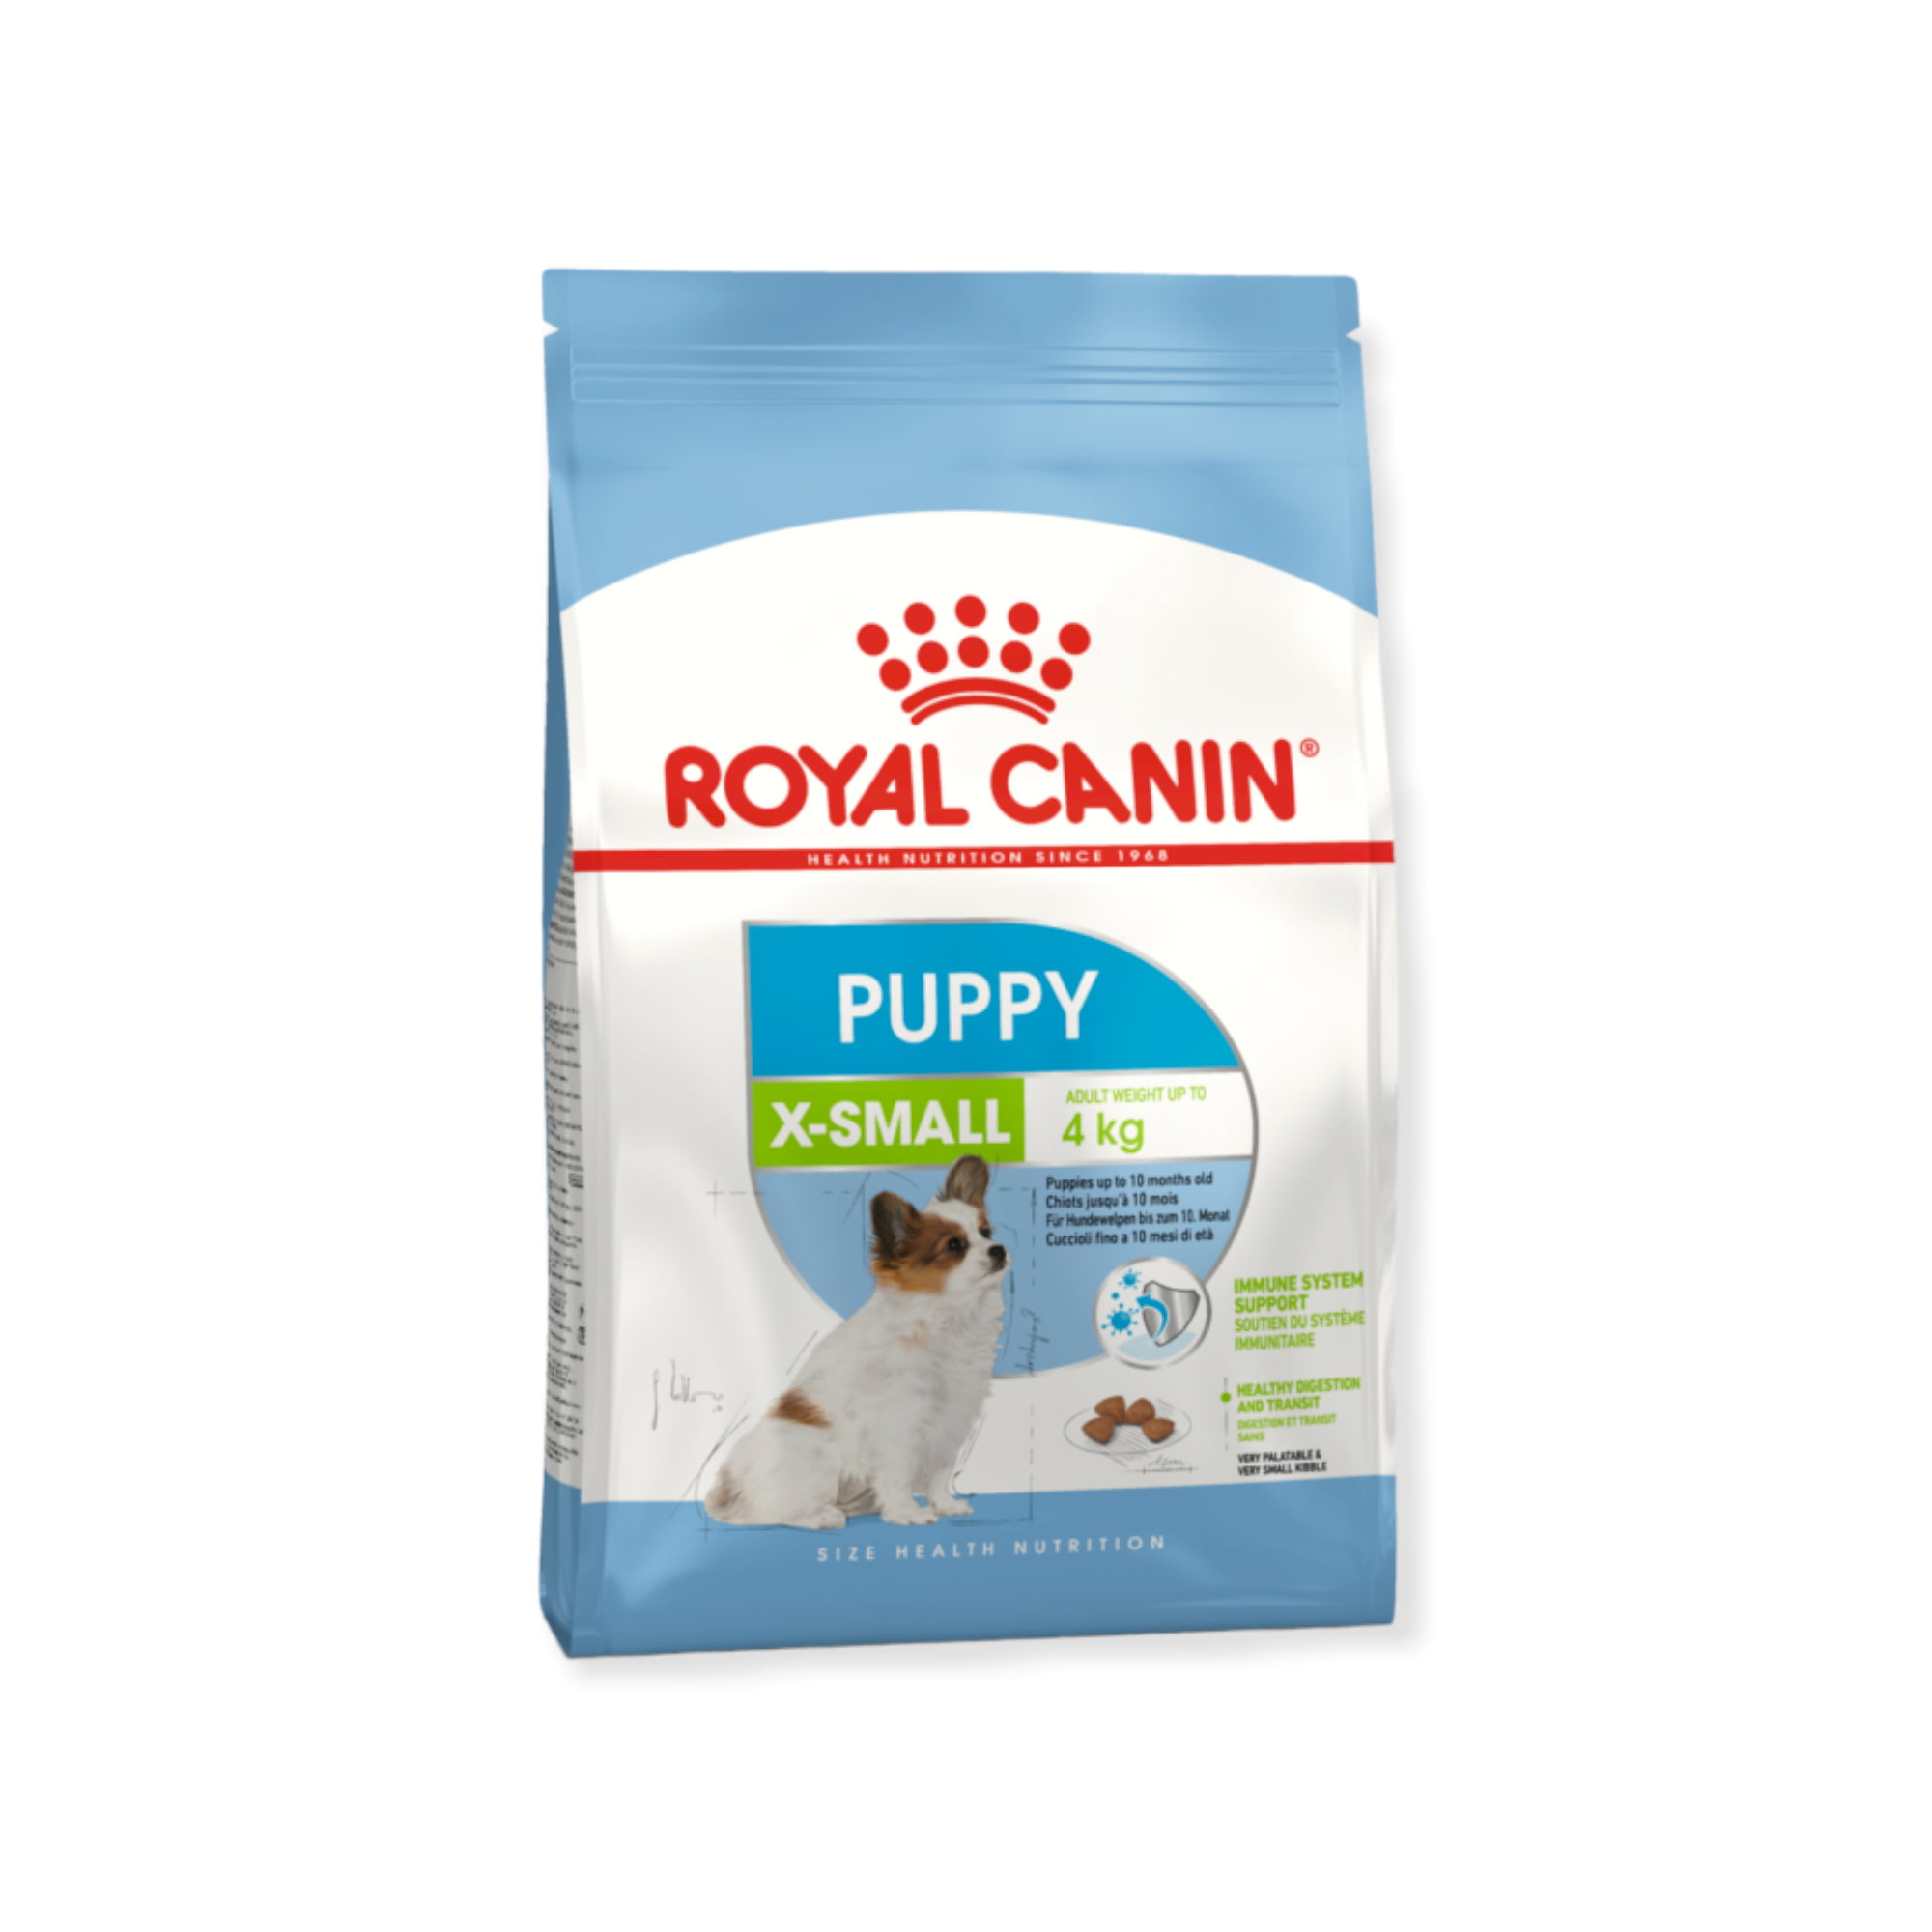 Royal Canin X-small Puppy 1.5kg